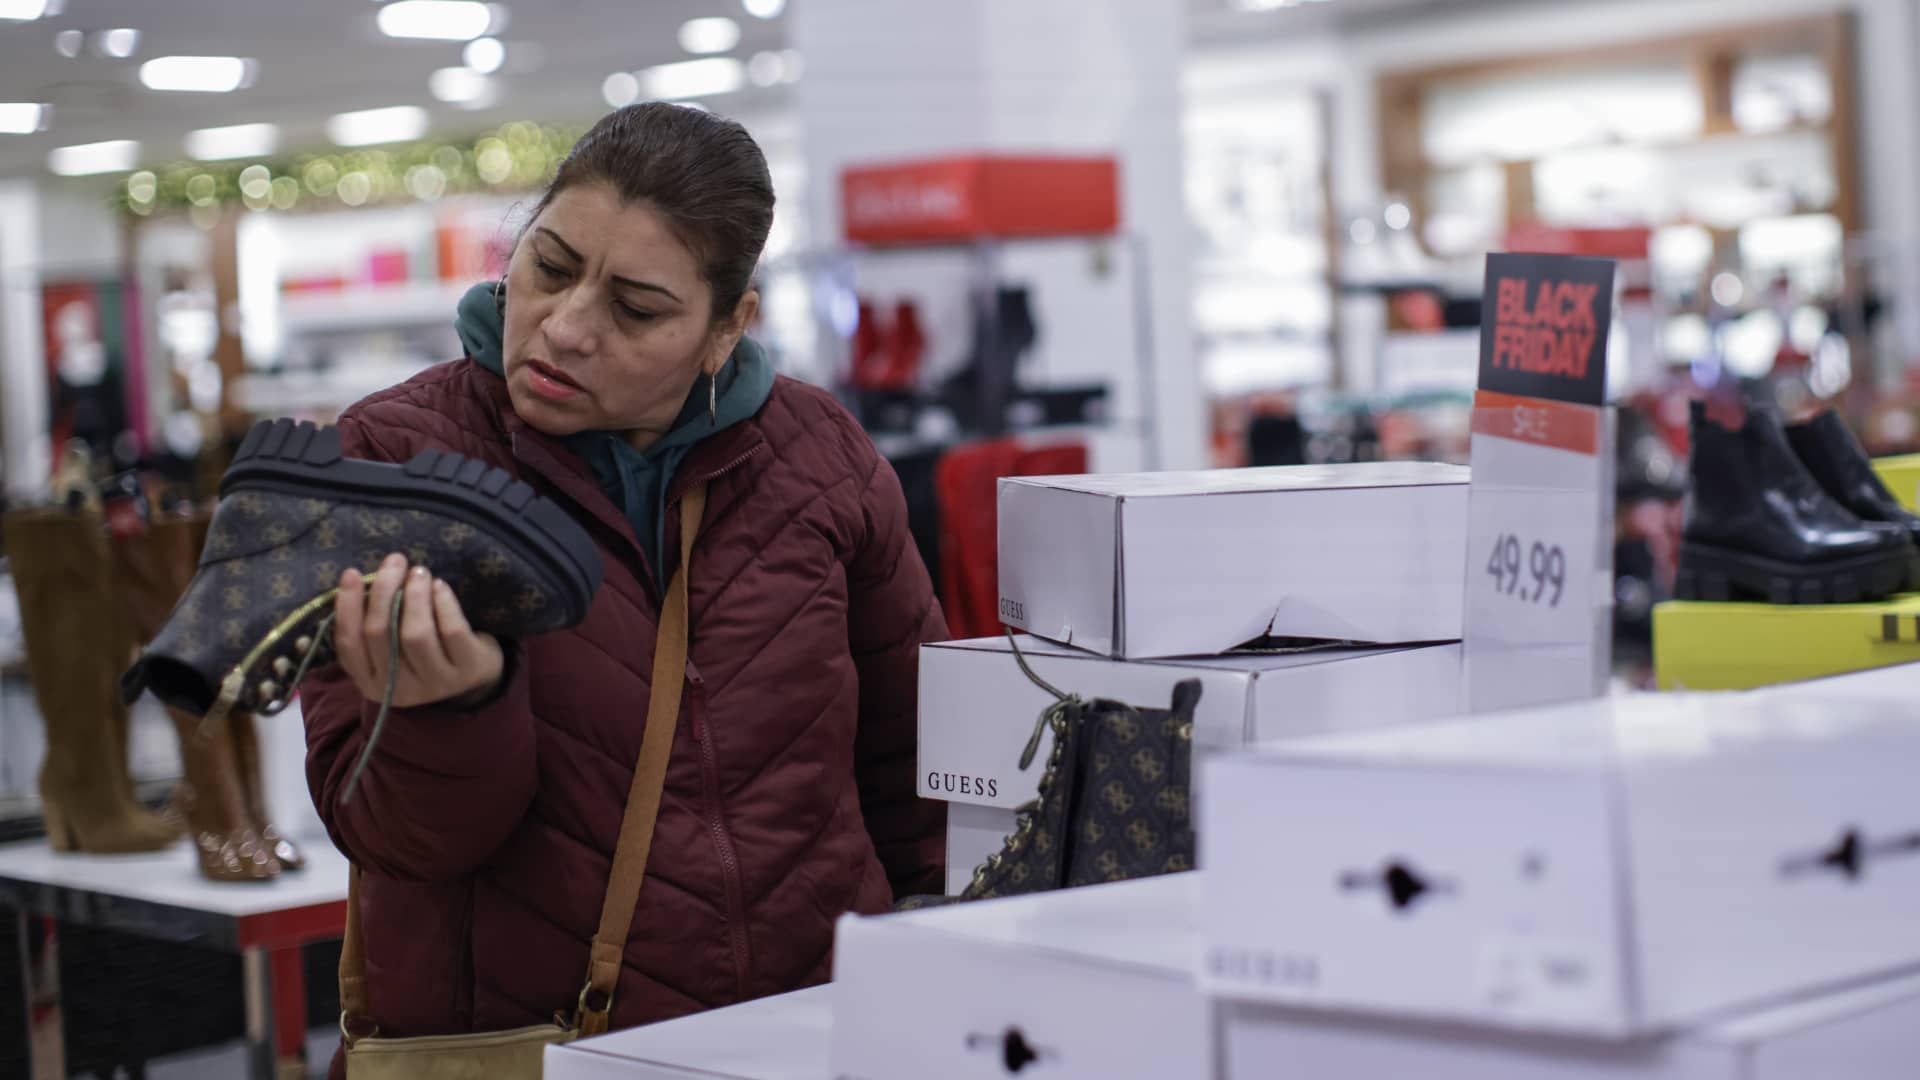 Shopper turnout hit record over Black Friday weekend, trade group says